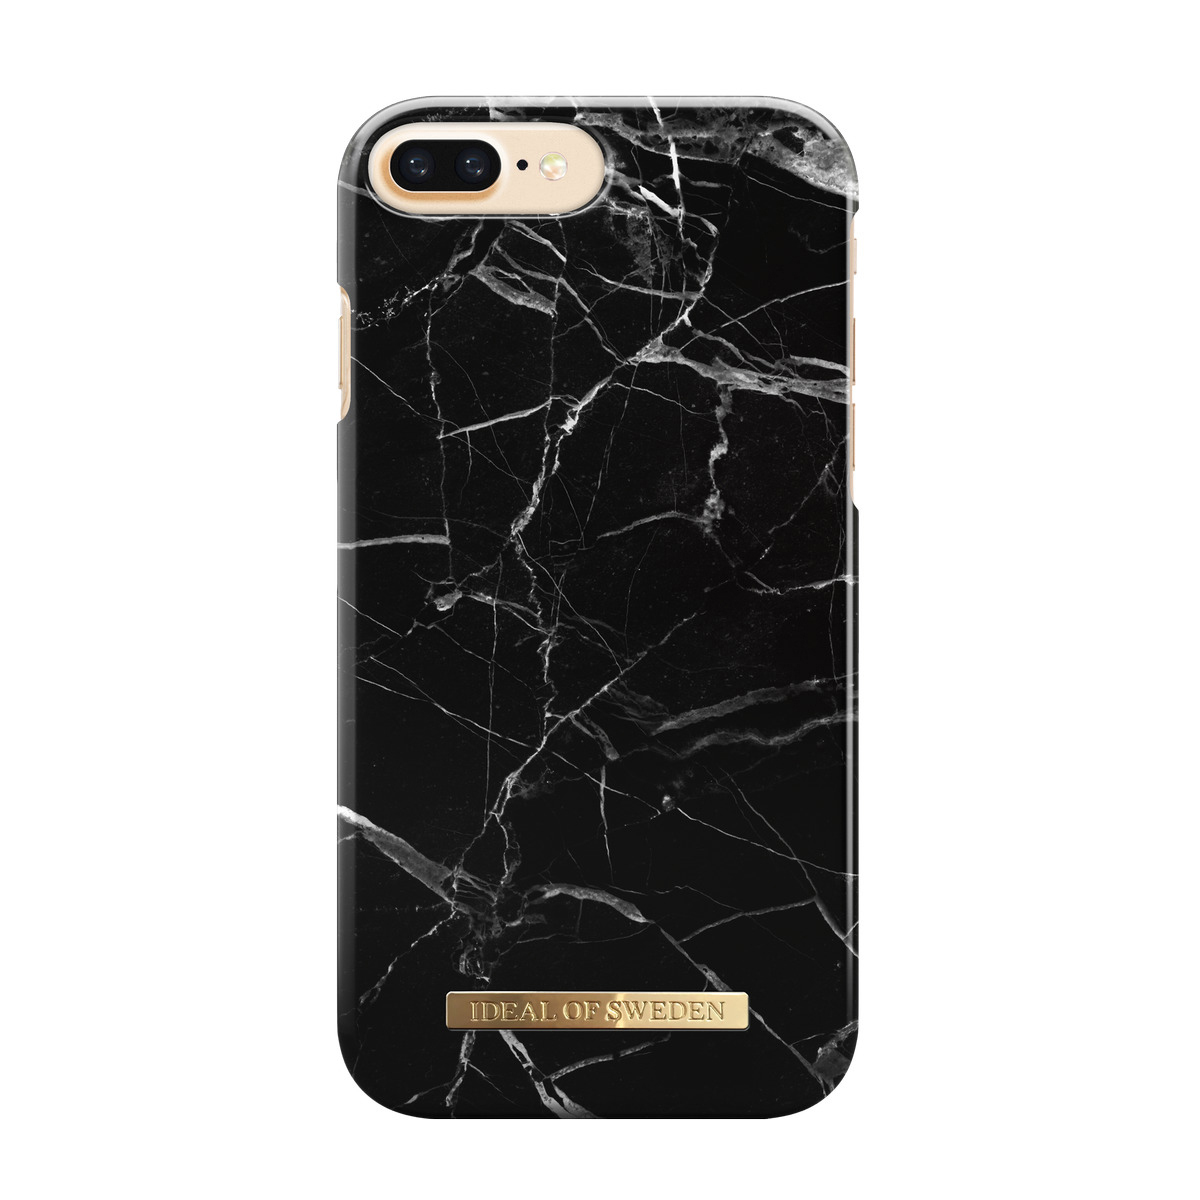 IDEAL OF SWEDEN Fashion, Backcover, 6 Plus, Apple, Plus 7 8 ,iPhone Plus, Marble iPhone Black iPhone